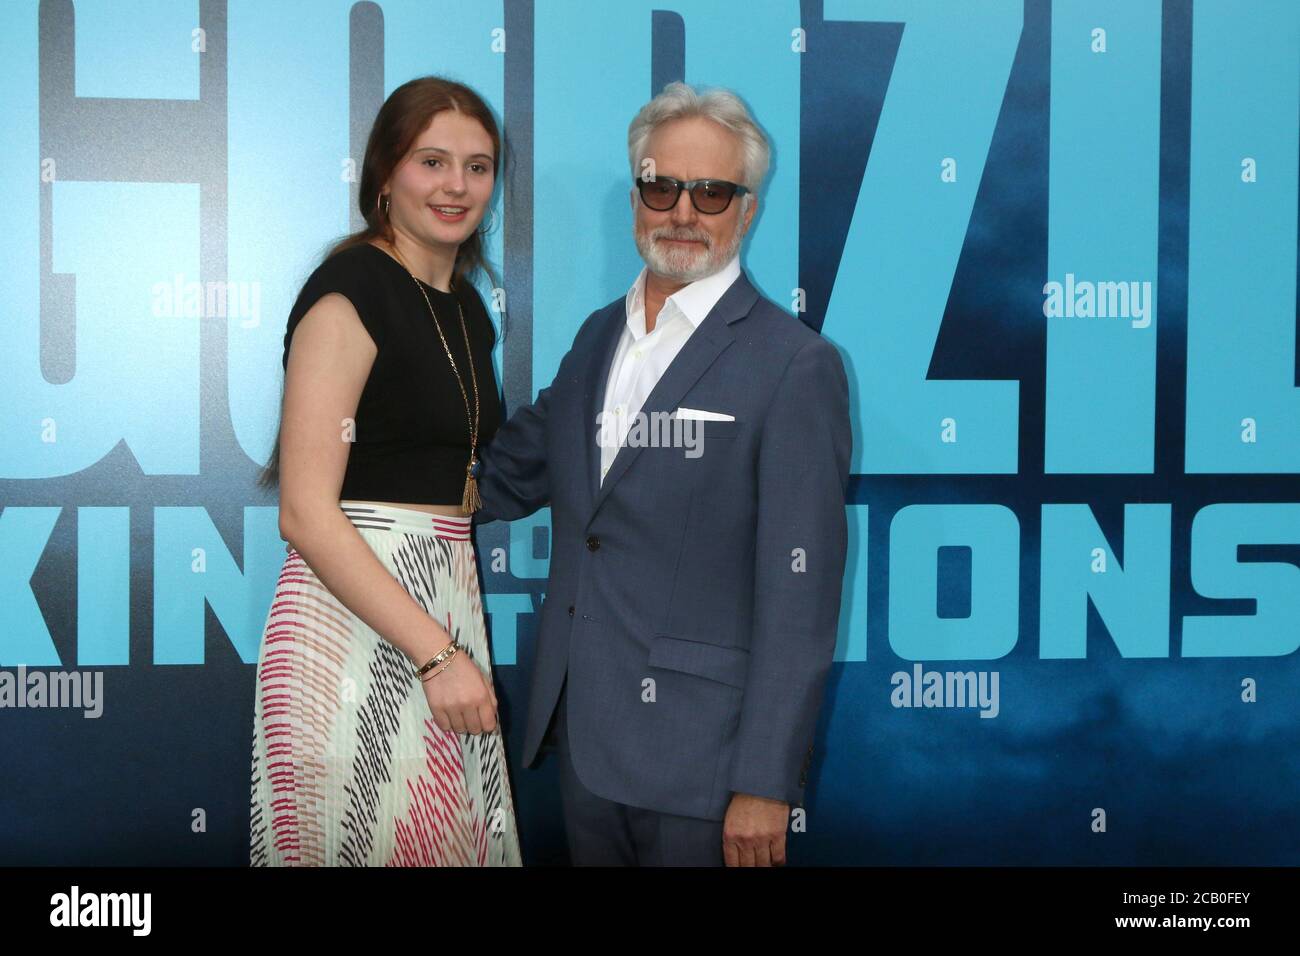 LOS ANGELES - MAI 18: Mary Louisa Whitford, Bradley Whitford bei der 'Godzilla: King of the Monsters' Premiere im TCL Chinese Theatre IMAX am 18. Mai 2019 in Los Angeles, CA Stockfoto